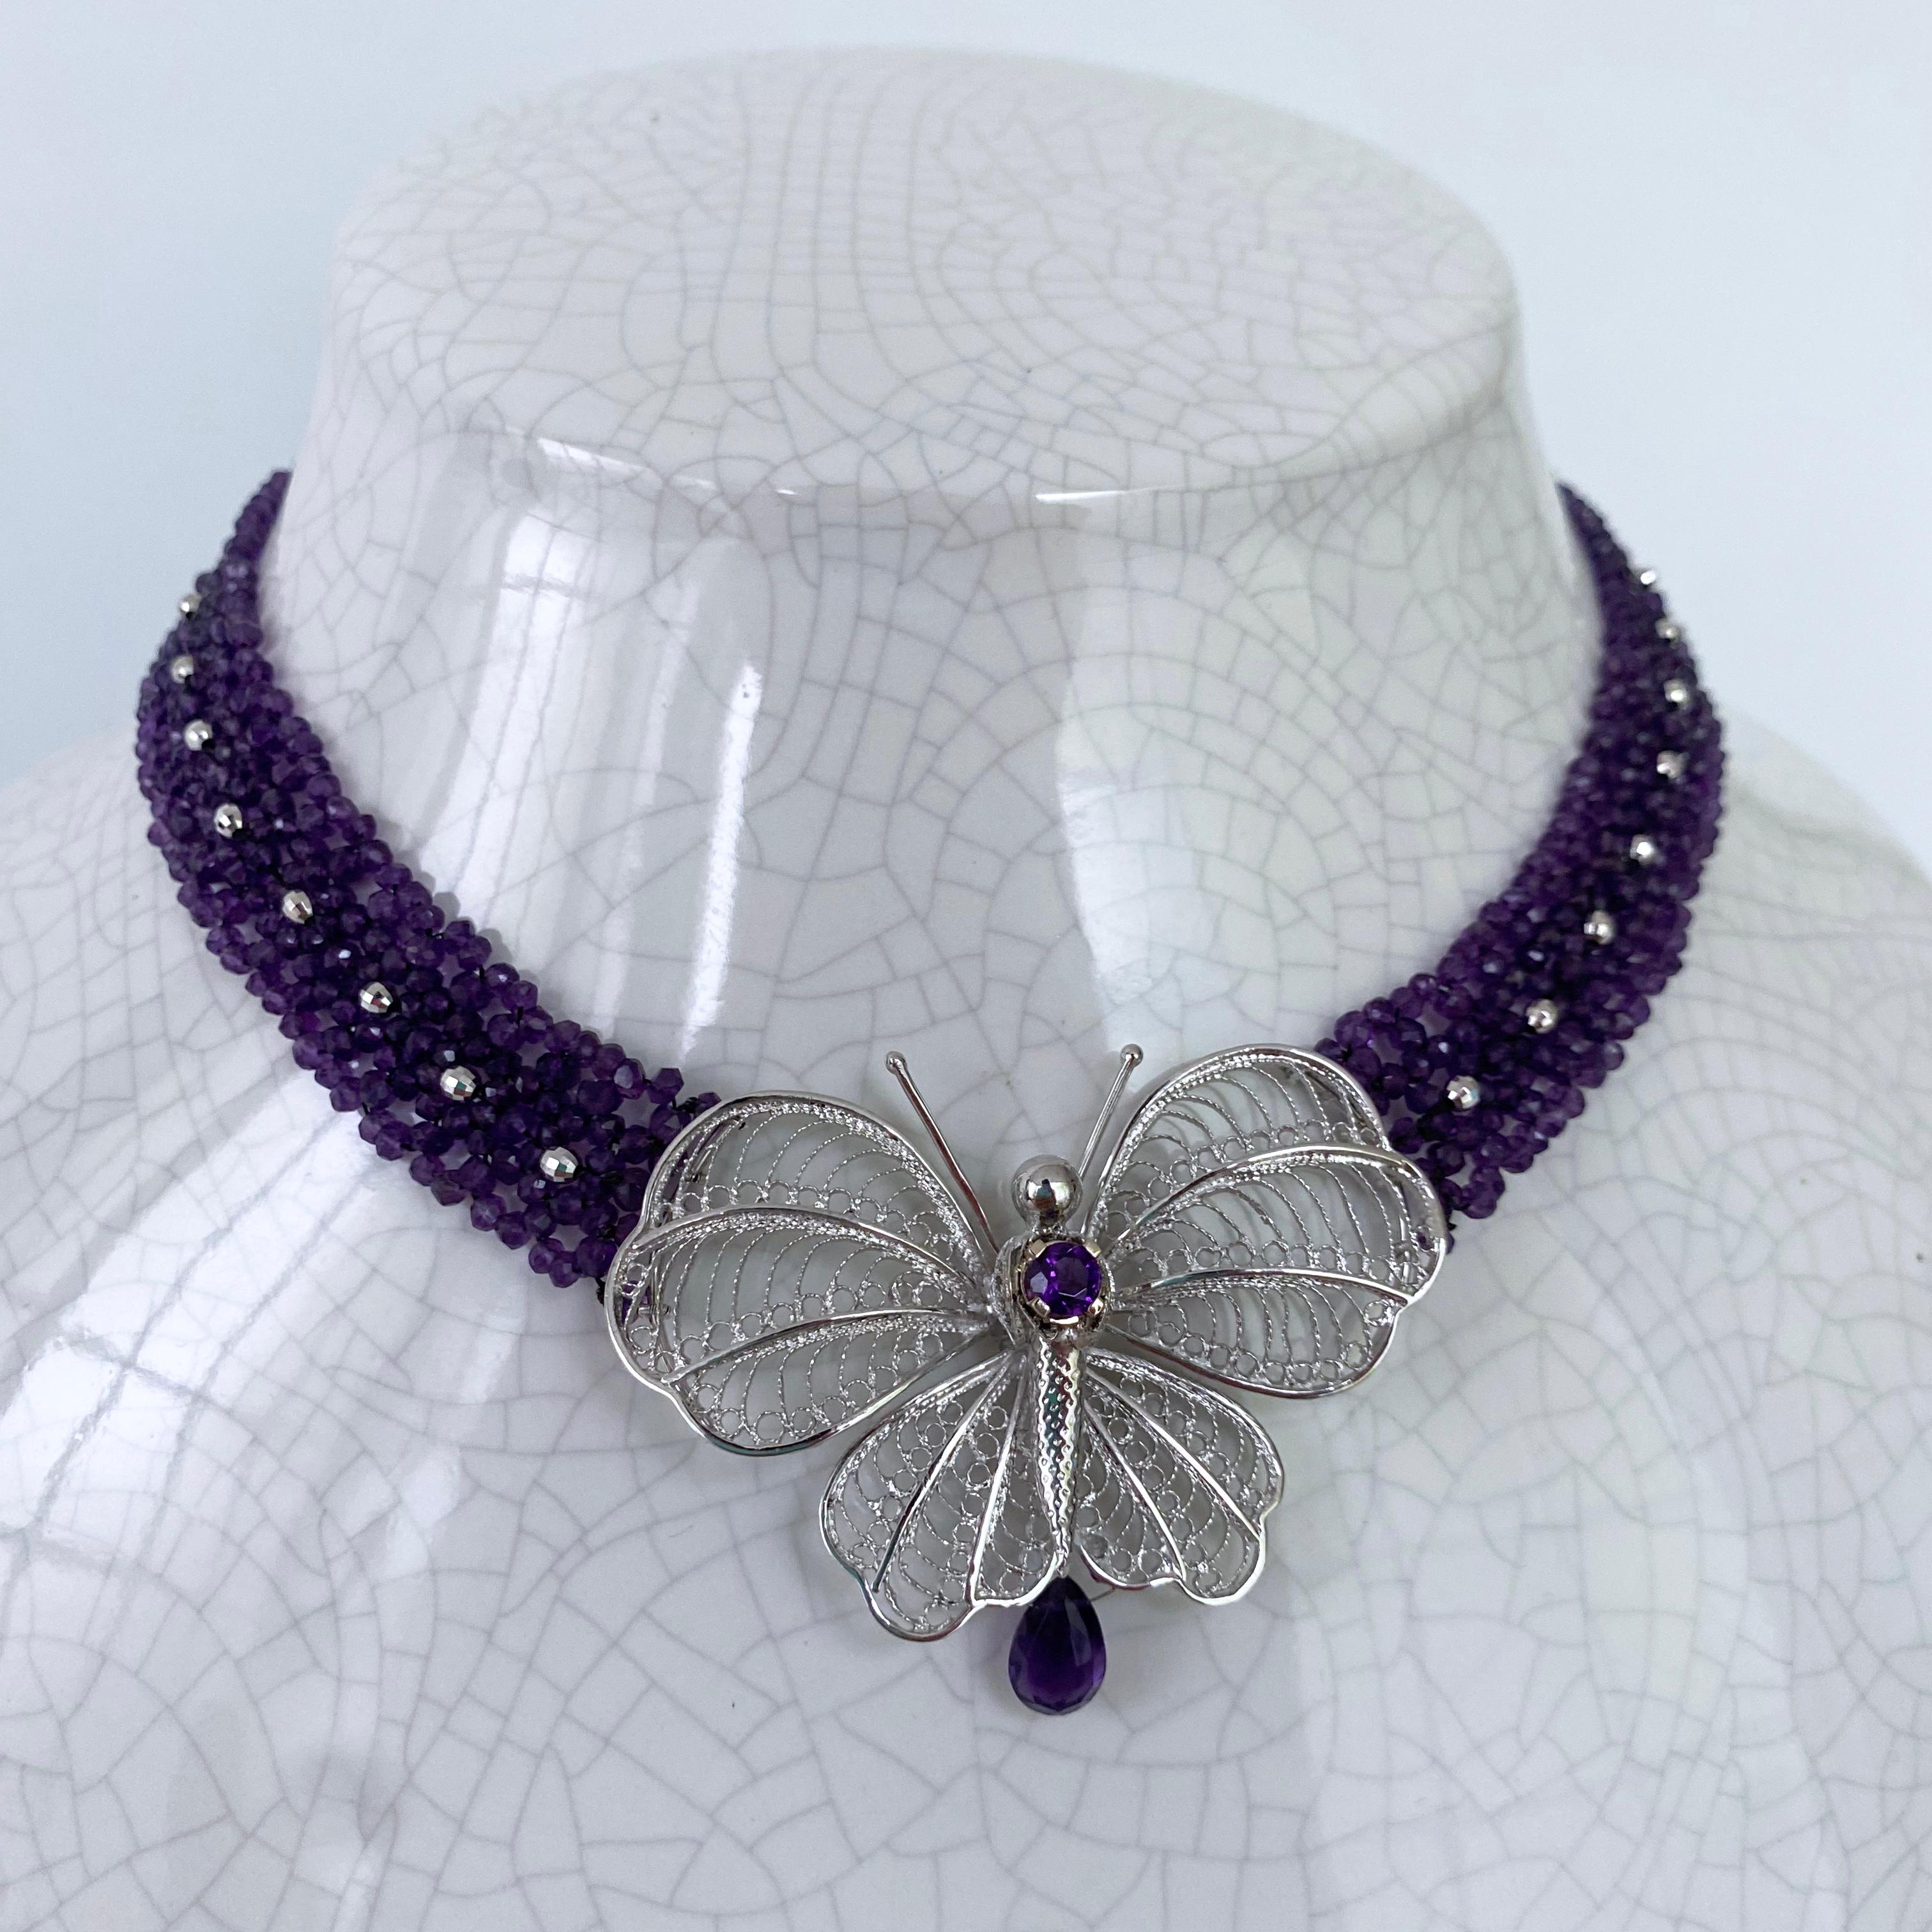 Artisan Woven Amethyst Necklace with Silver Butterfly Centerpiece For Sale